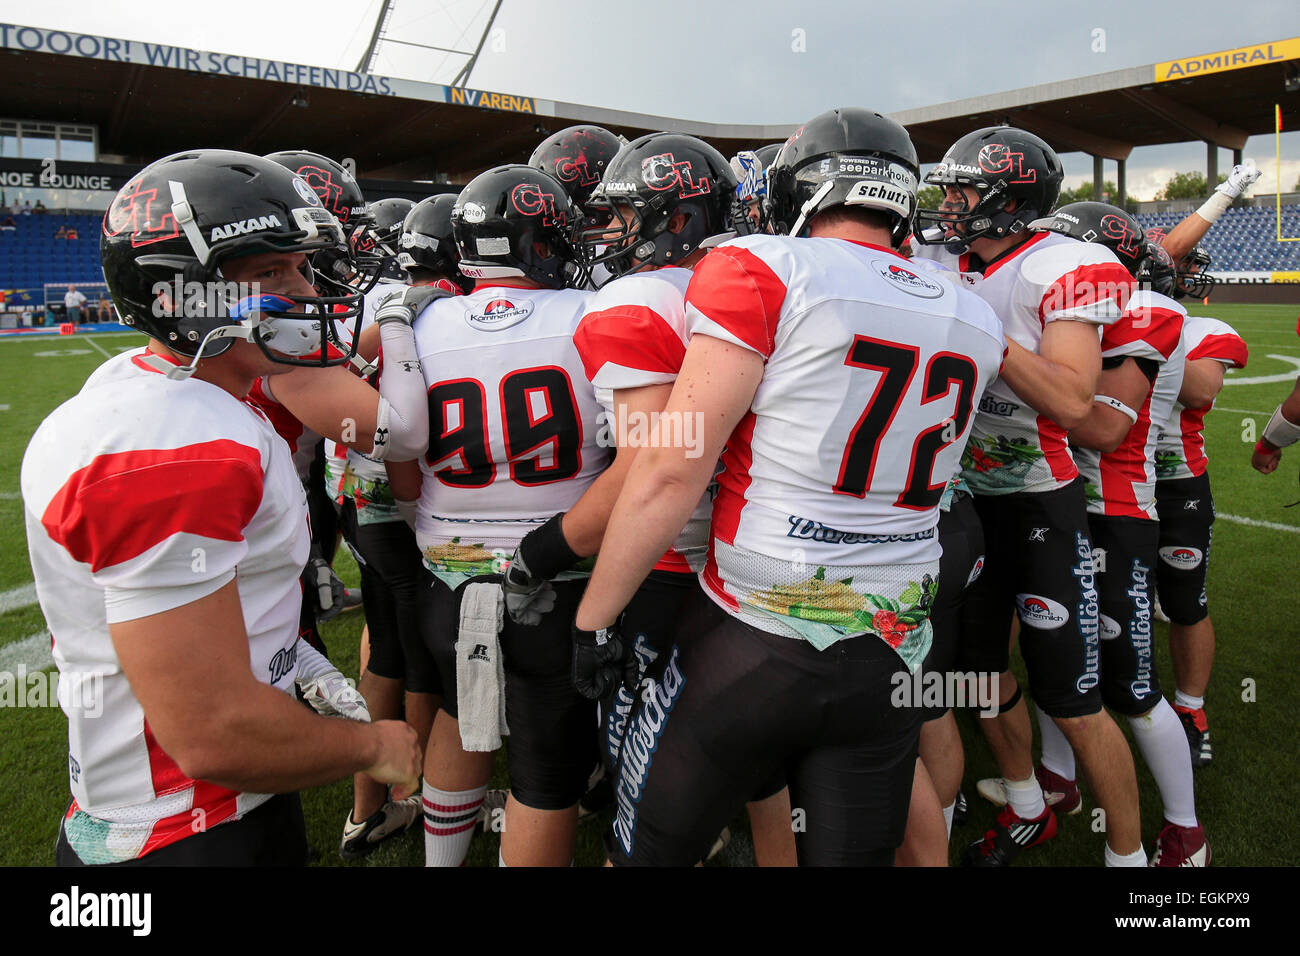 ST. POELTEN, AUSTRIA - JULY 26, 2014: The team of the Carinthian Lions stands in a huddle before Silver Bowl XVII. Stock Photo